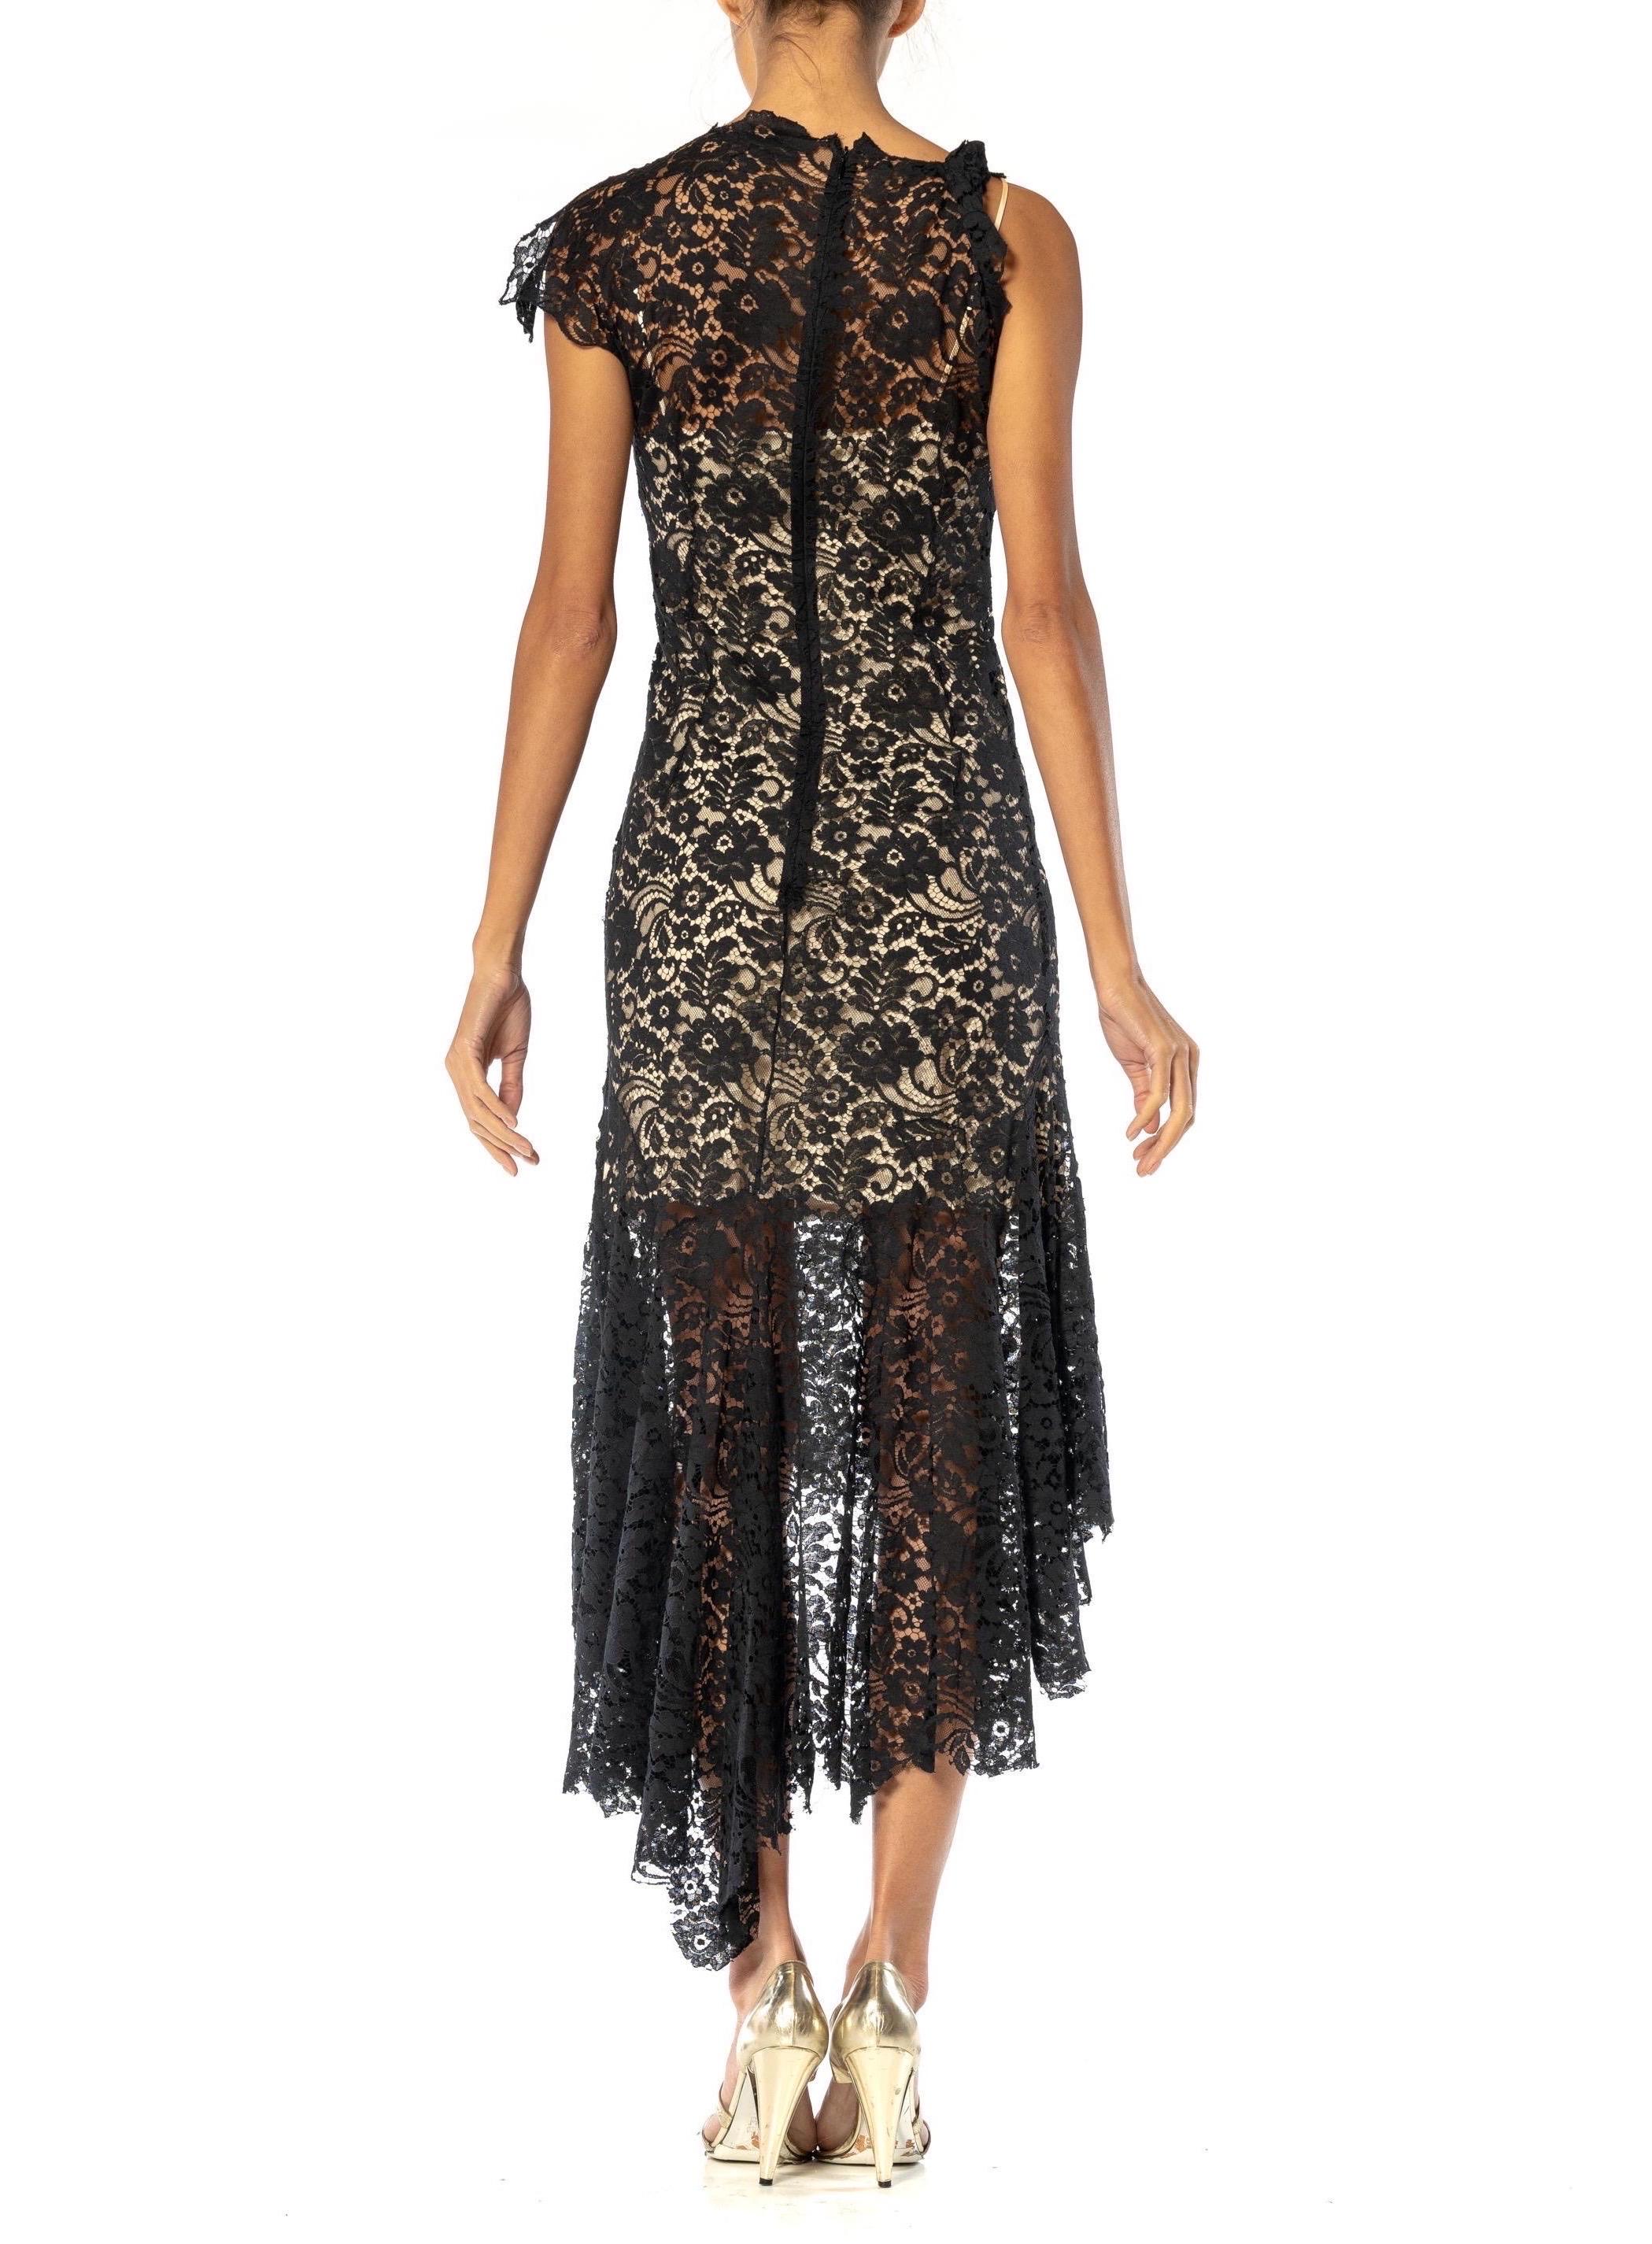 1990S JOHN GALLIANO CHRISTIAN DIOR Black Rayon Blend Lace Cocktail Dress For Sale 4